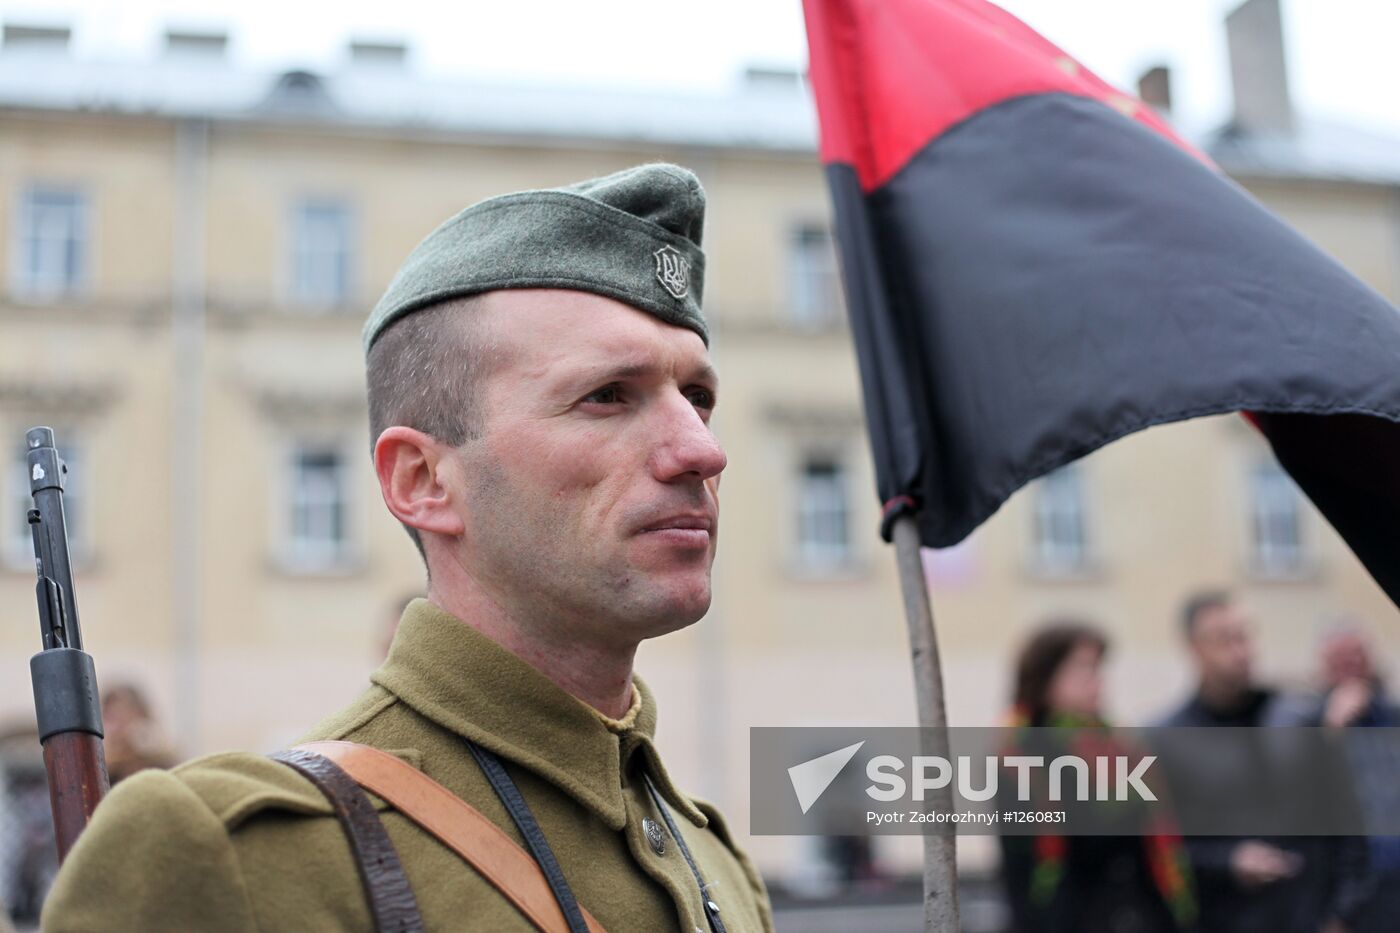 March to mark 70th anniversary of Ukrainian Insurgent Army